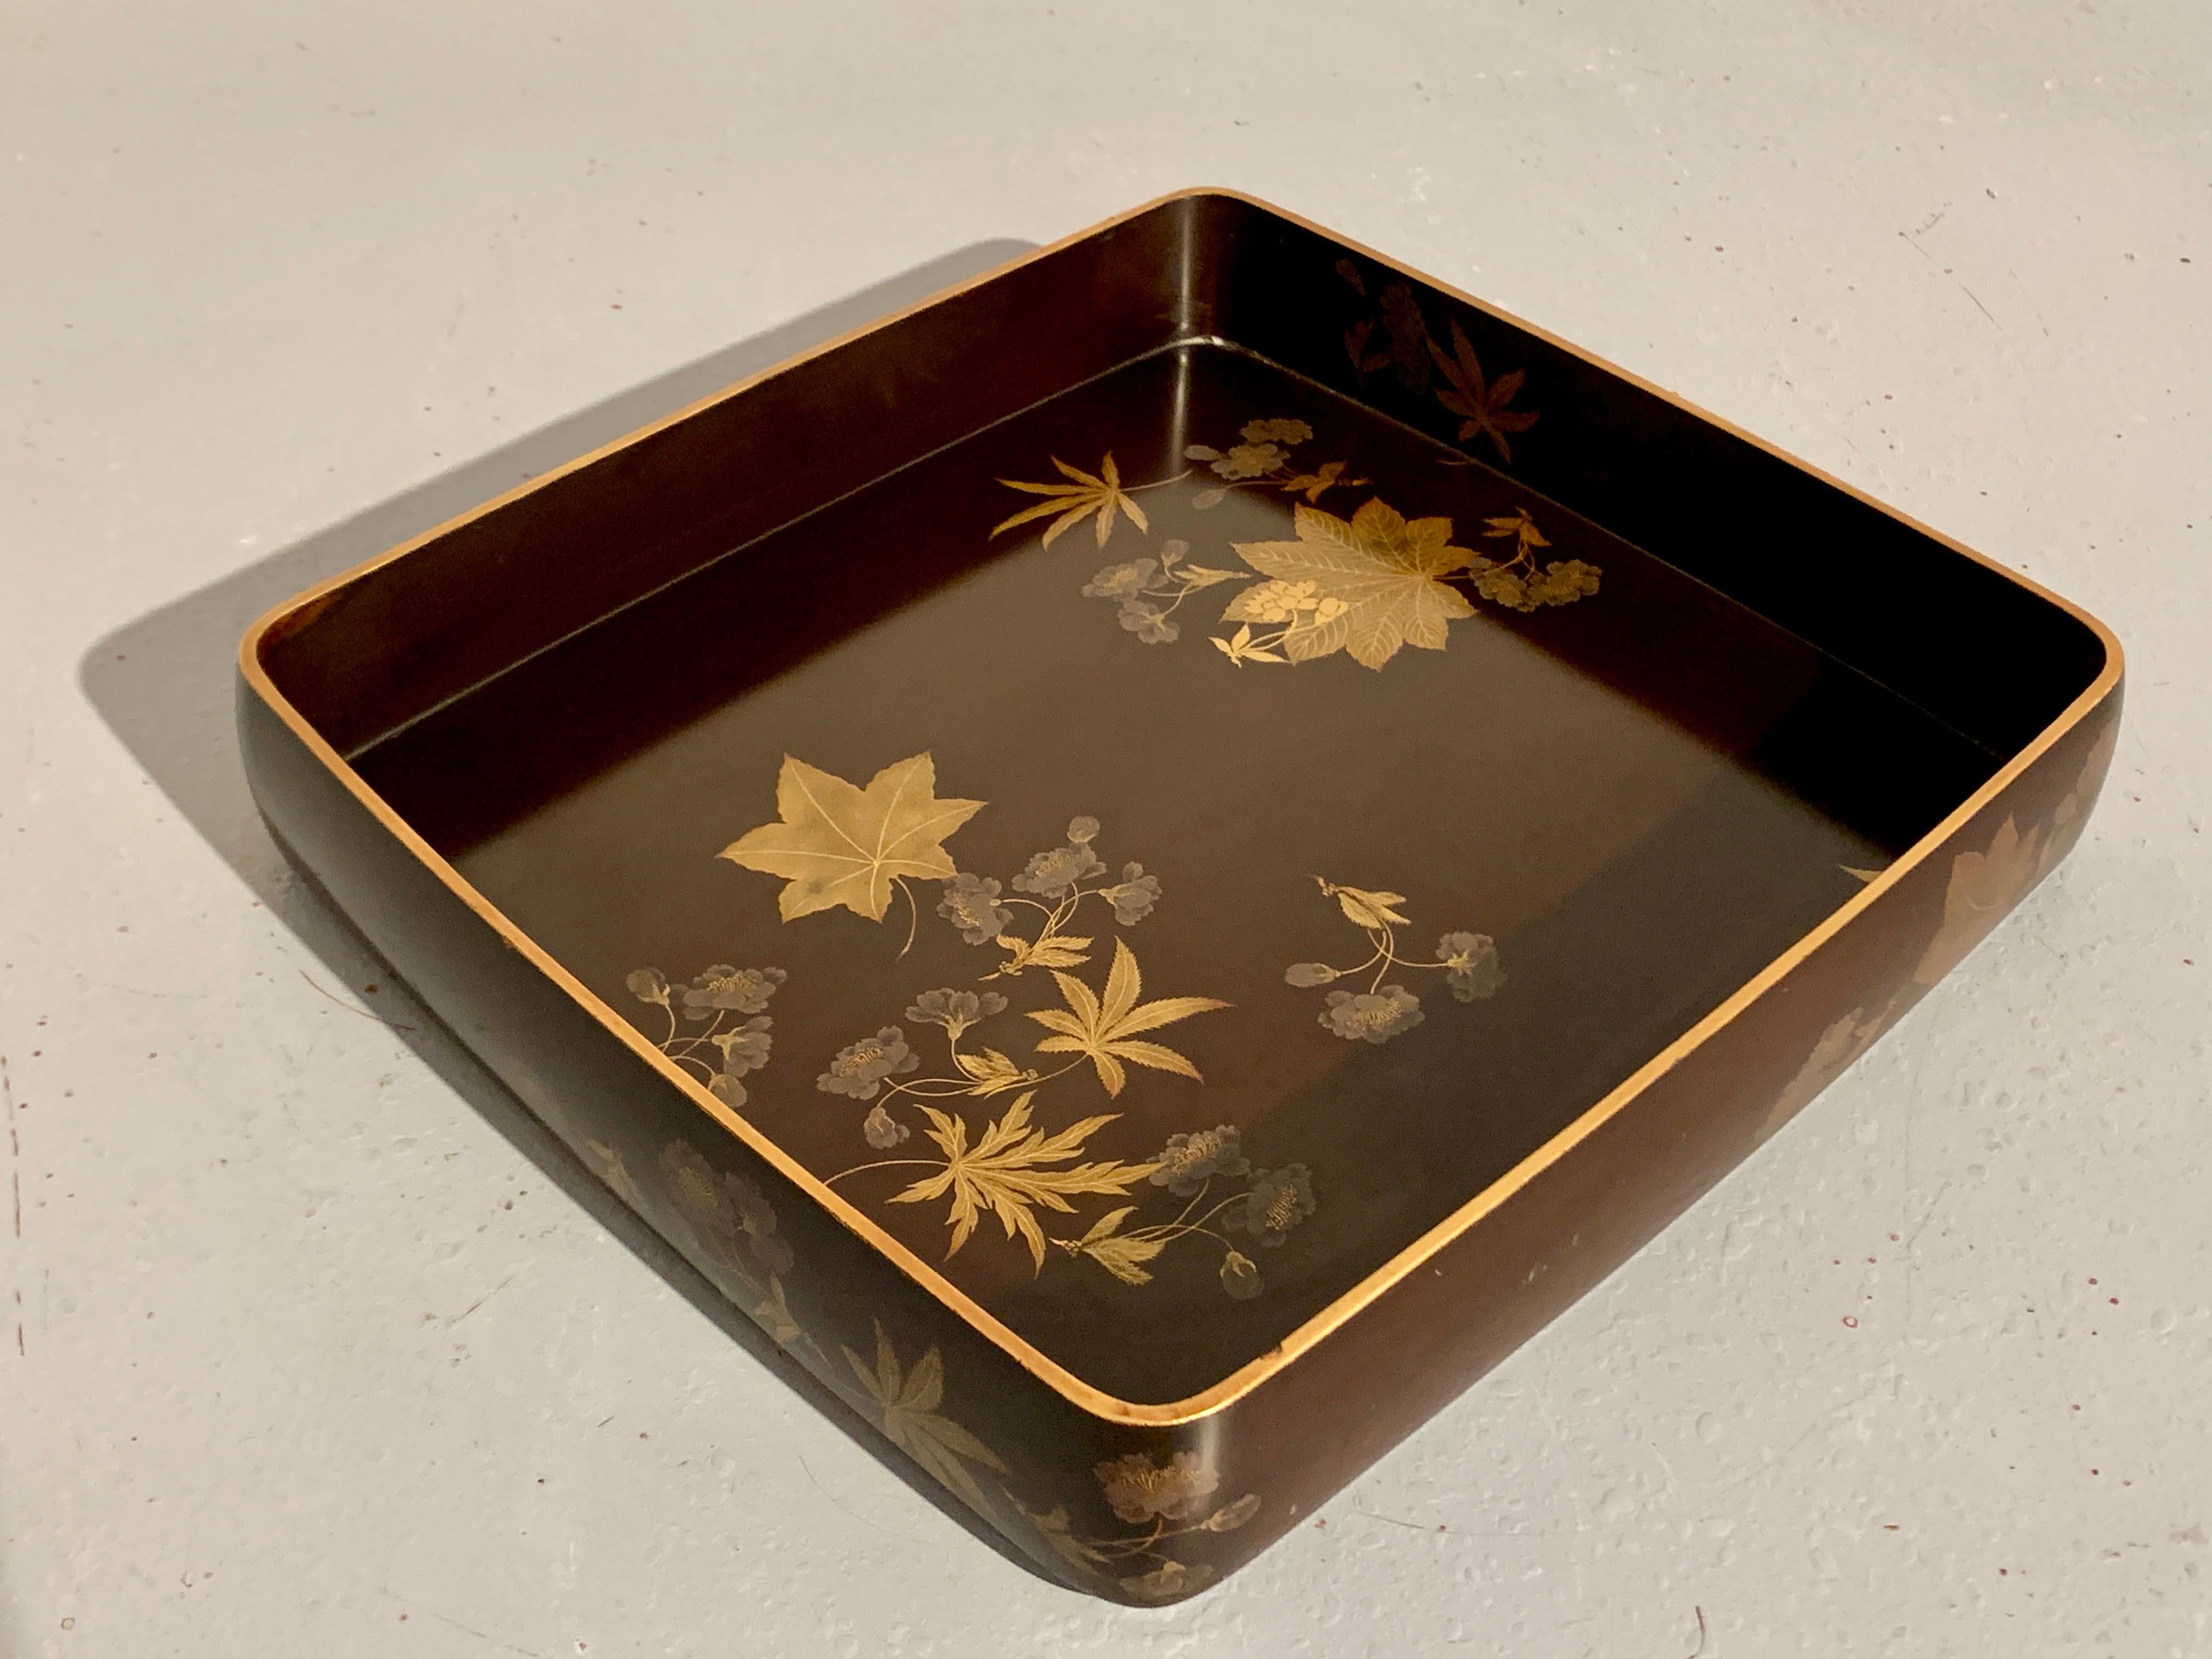 Hand-Crafted Japanese Lacquer Tray by Zohiko, Meiji Period, Early 20th Century, Japan